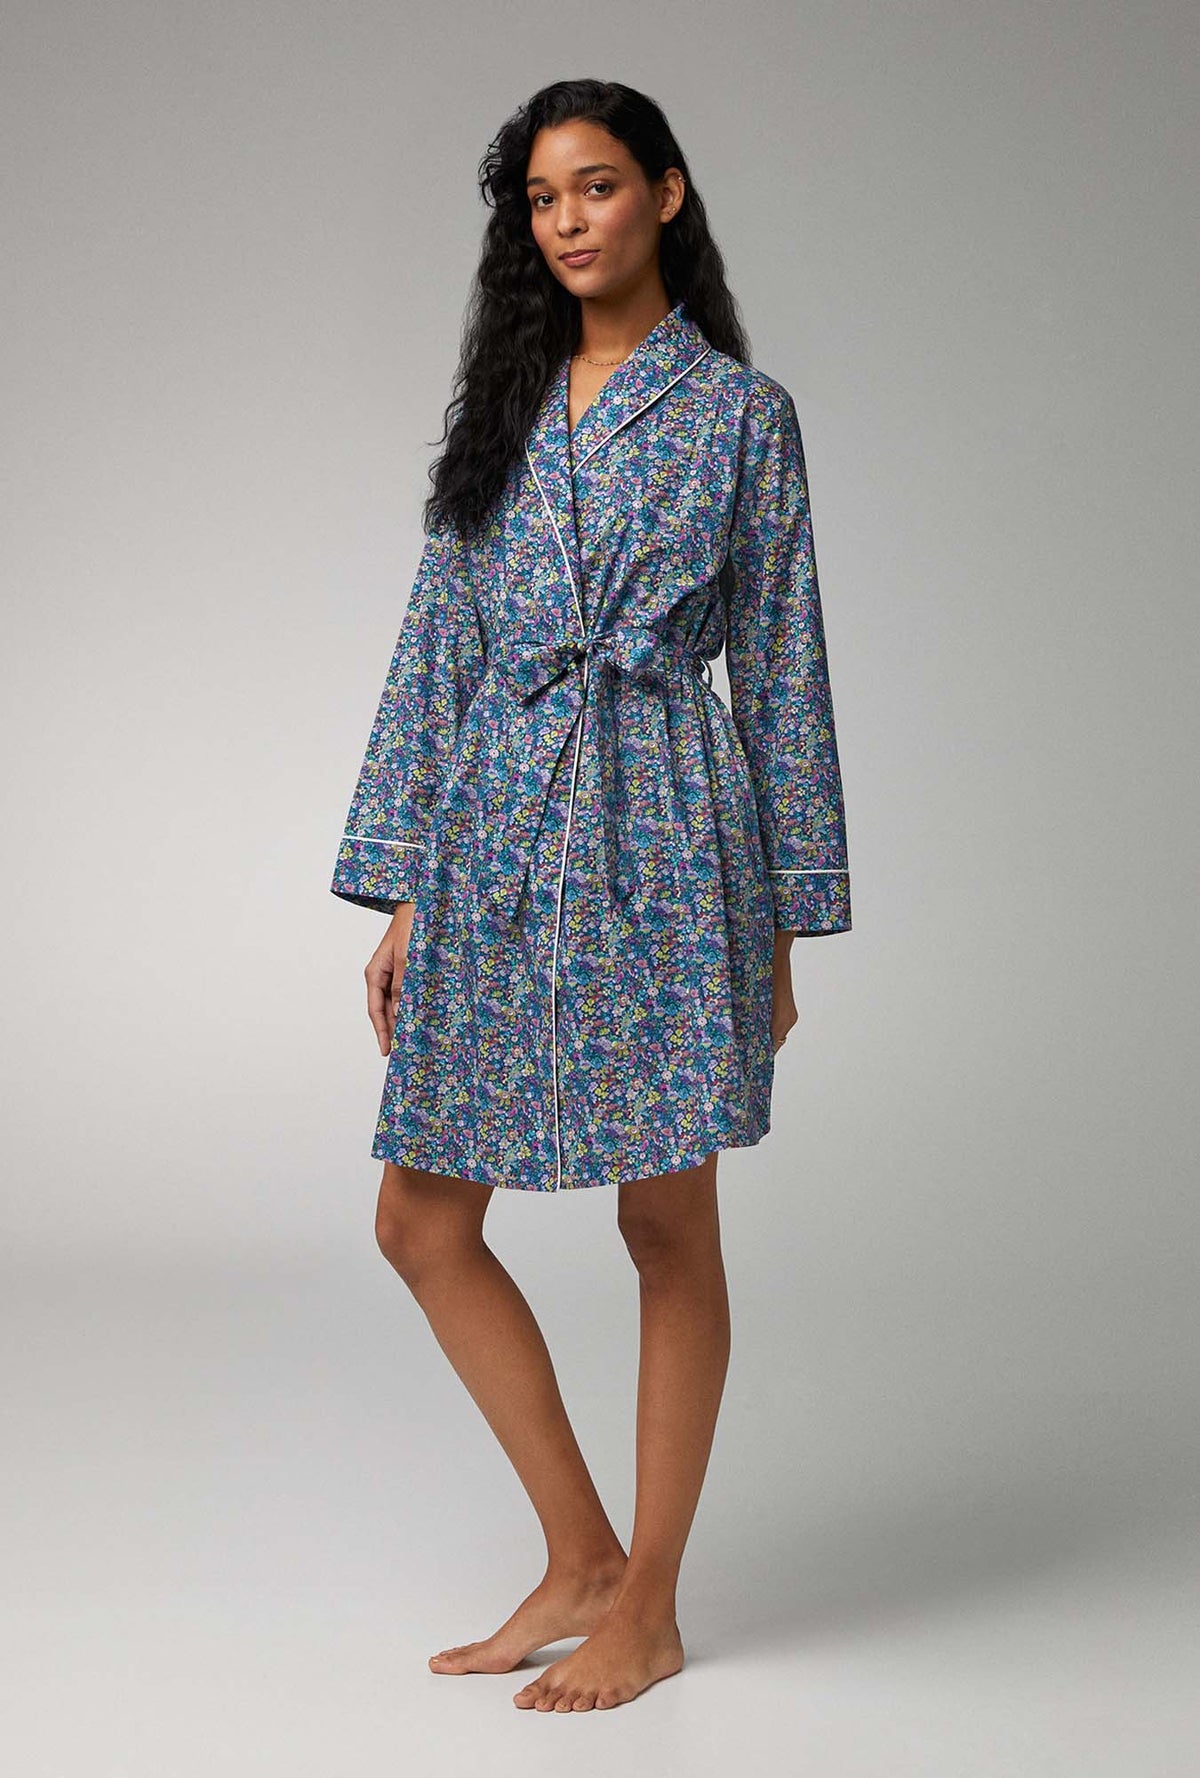 A lady wearing blue long sleeve shawl collar classic woven tana lawn robe made with liberty fabrics with classic garden print.